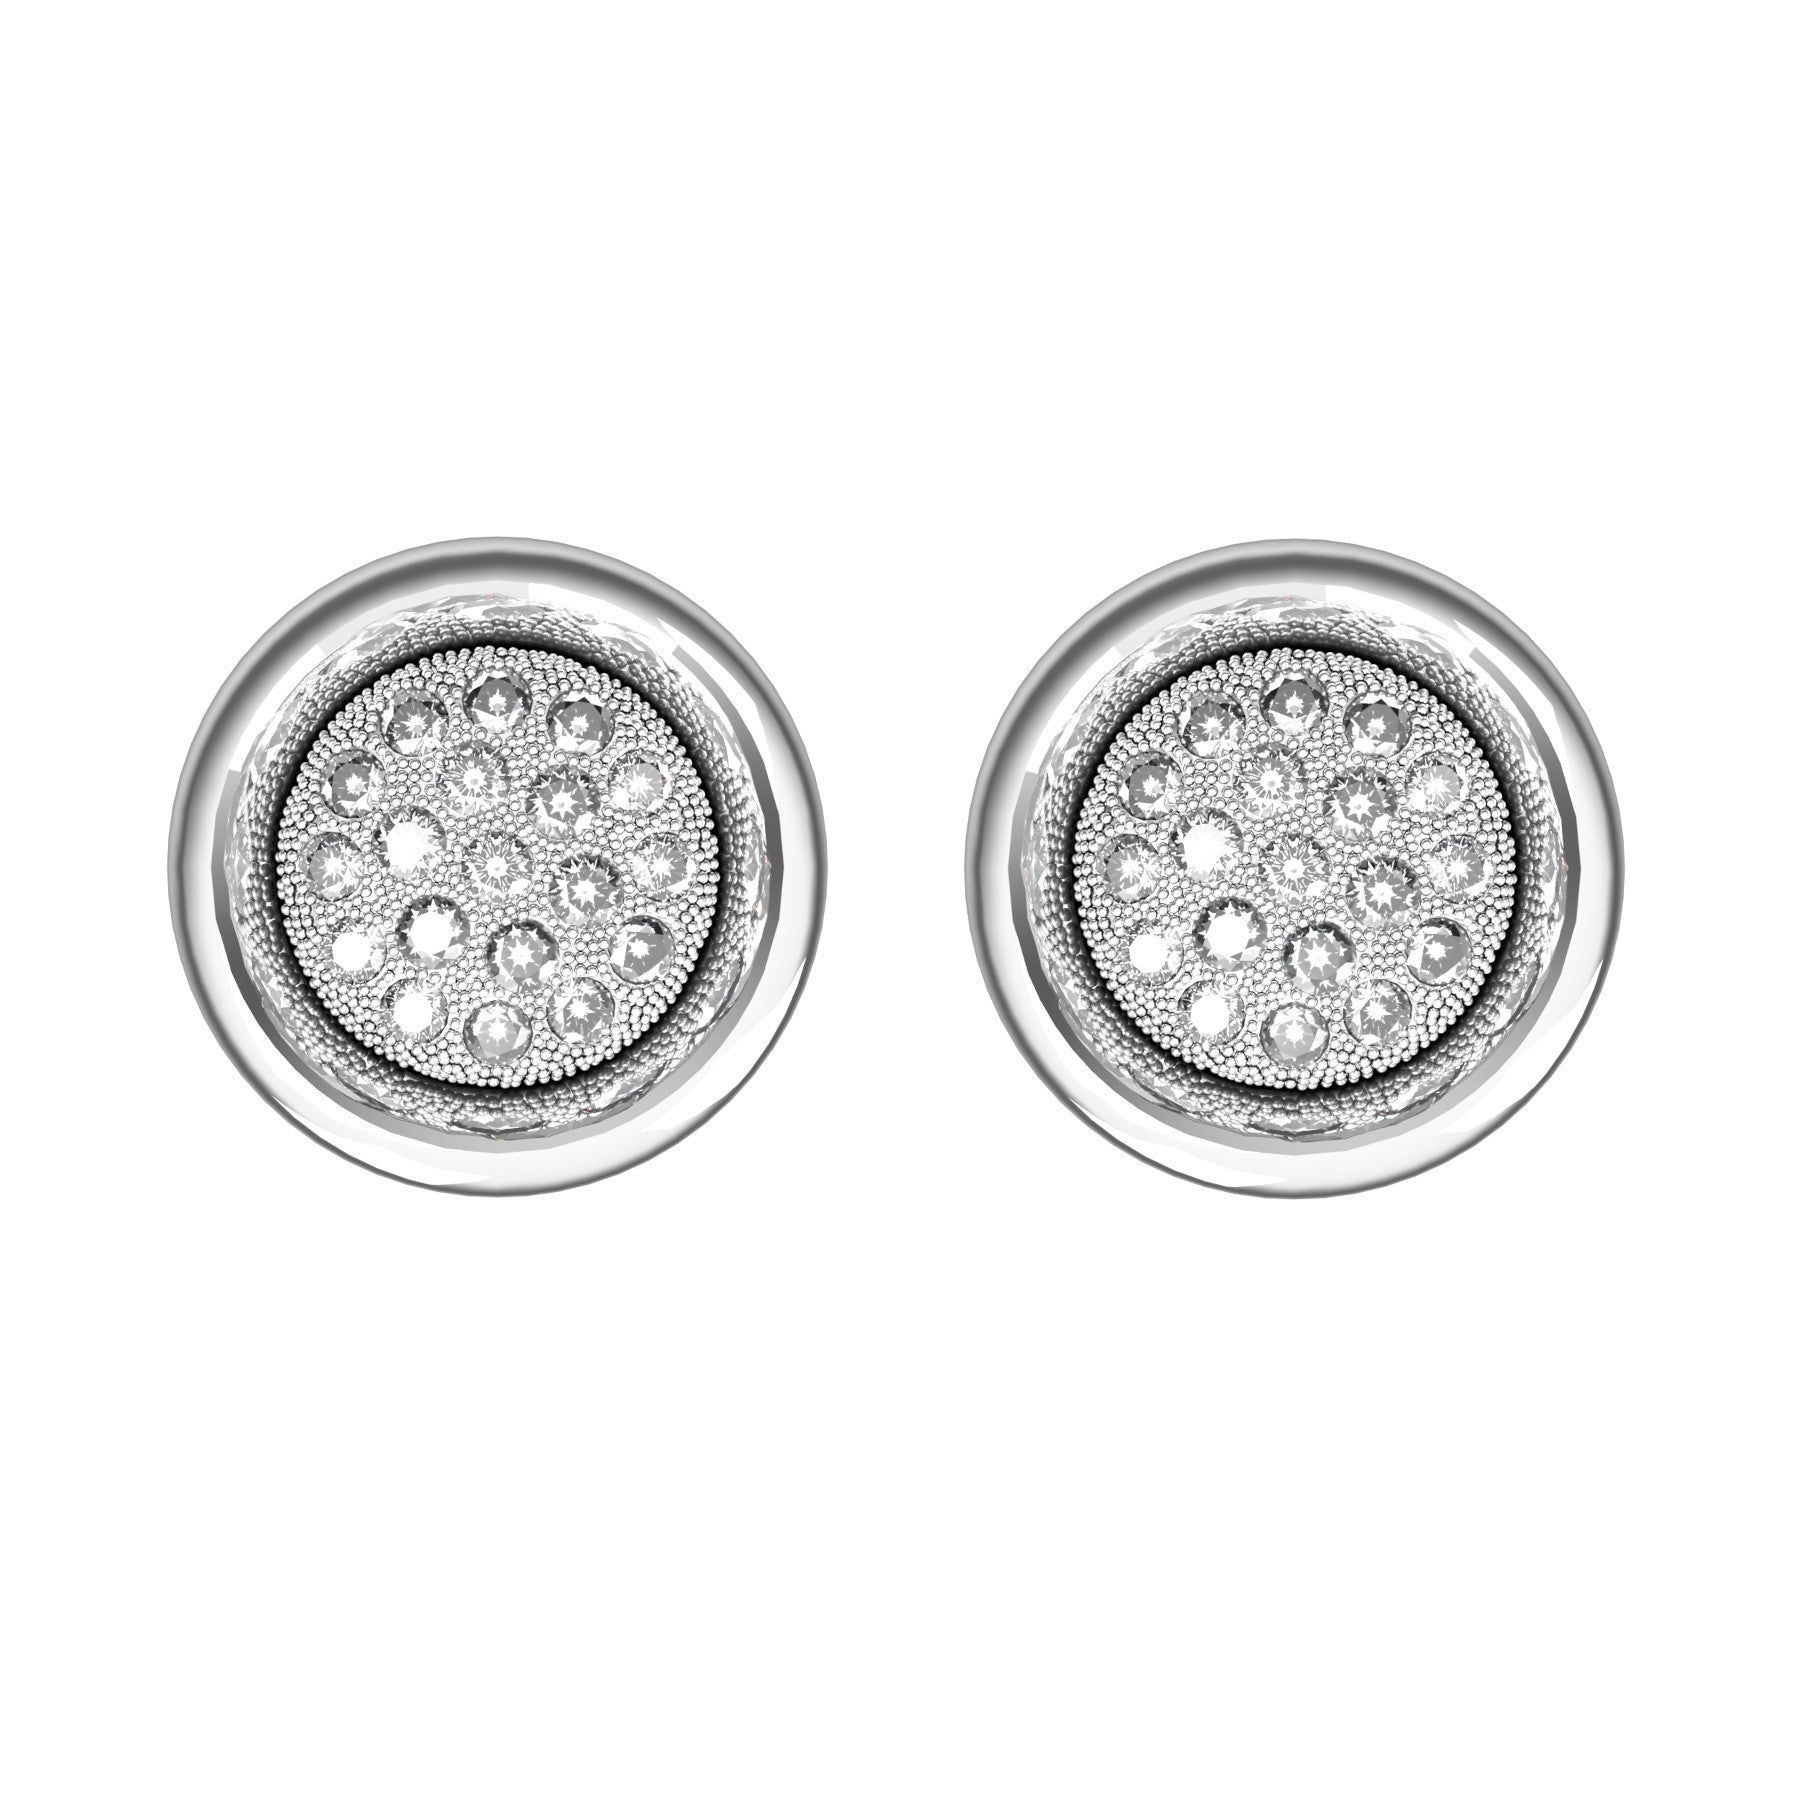 round earrings, round natural diamonds, 18 K white gold, weight about 11,0 g. (0.39 oz) diameter 15 mm